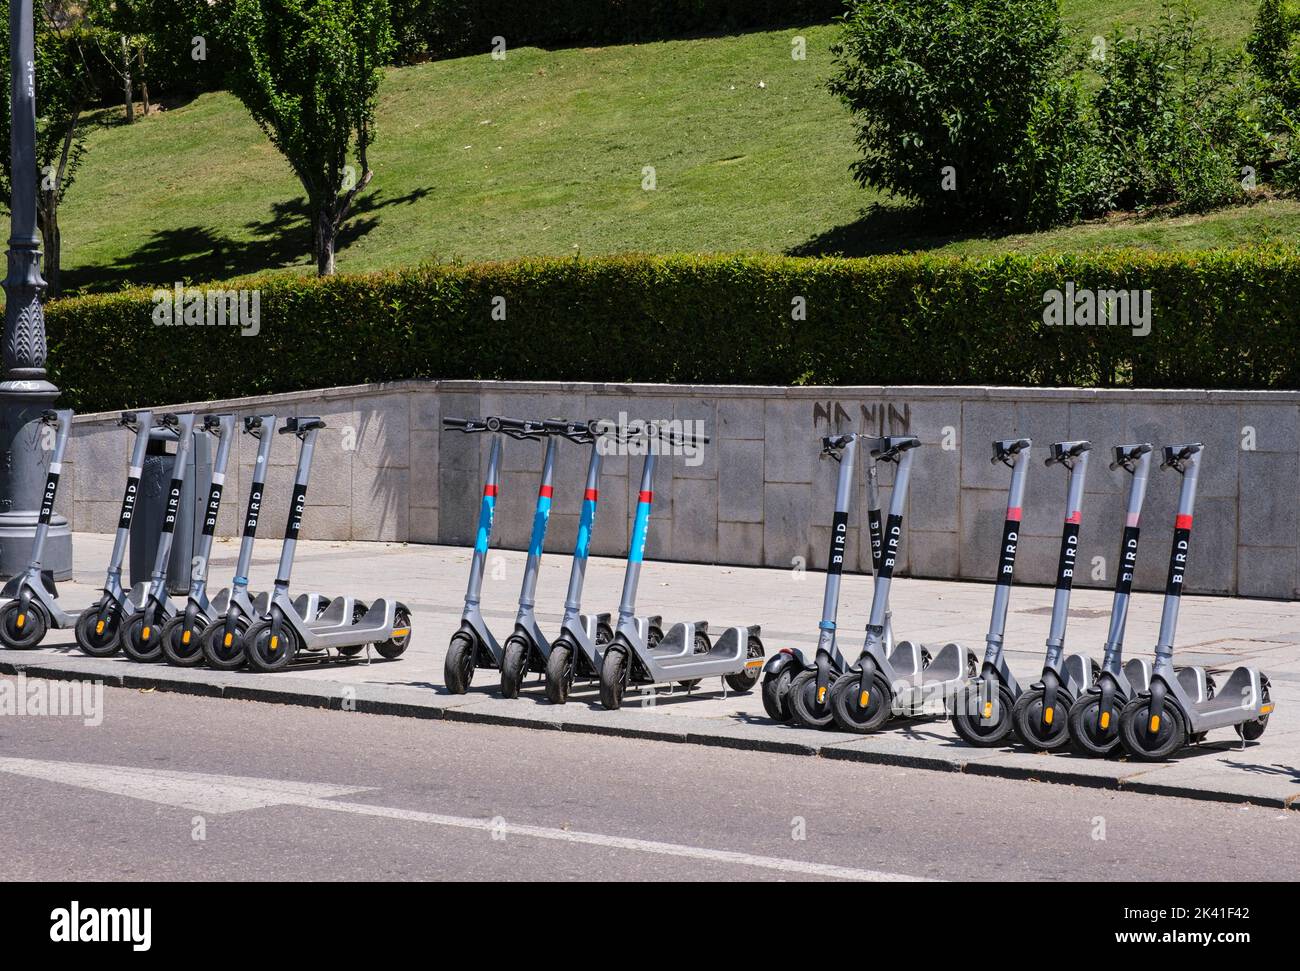 Spain, Madrid. Motorized Scooters for Rent. Stock Photo